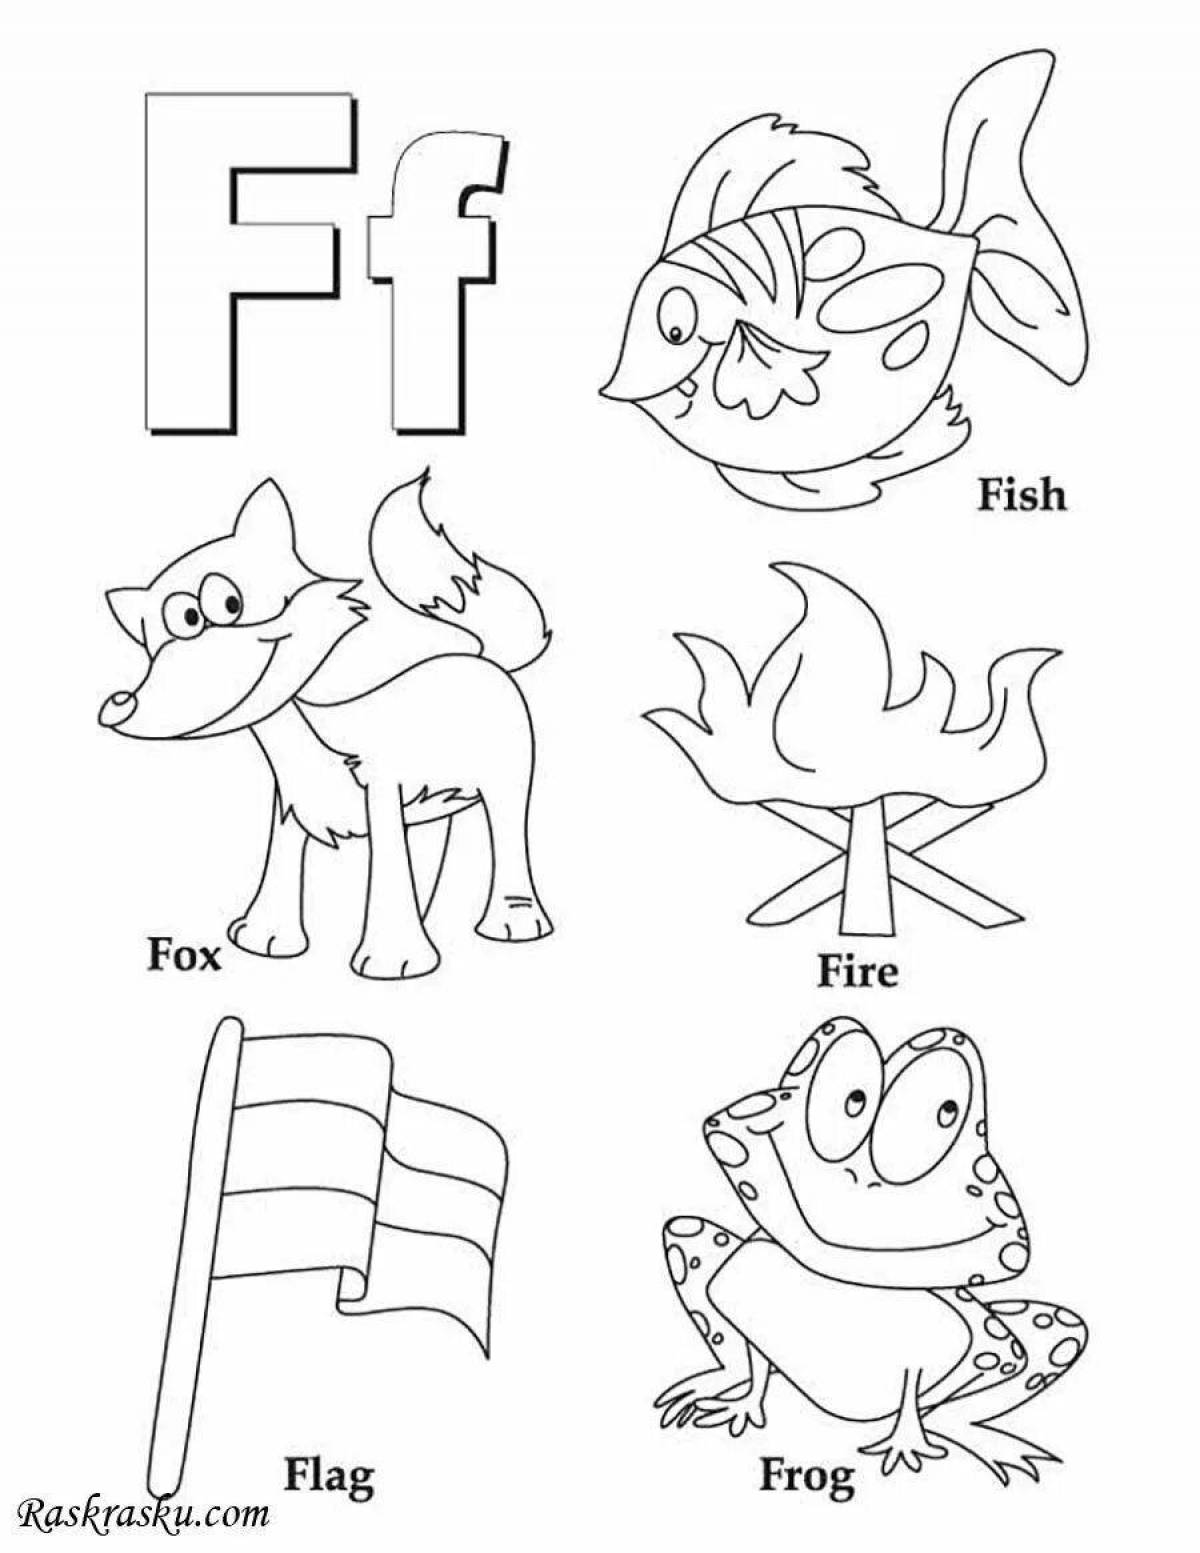 Fancy alphabet knowledge f coloring book